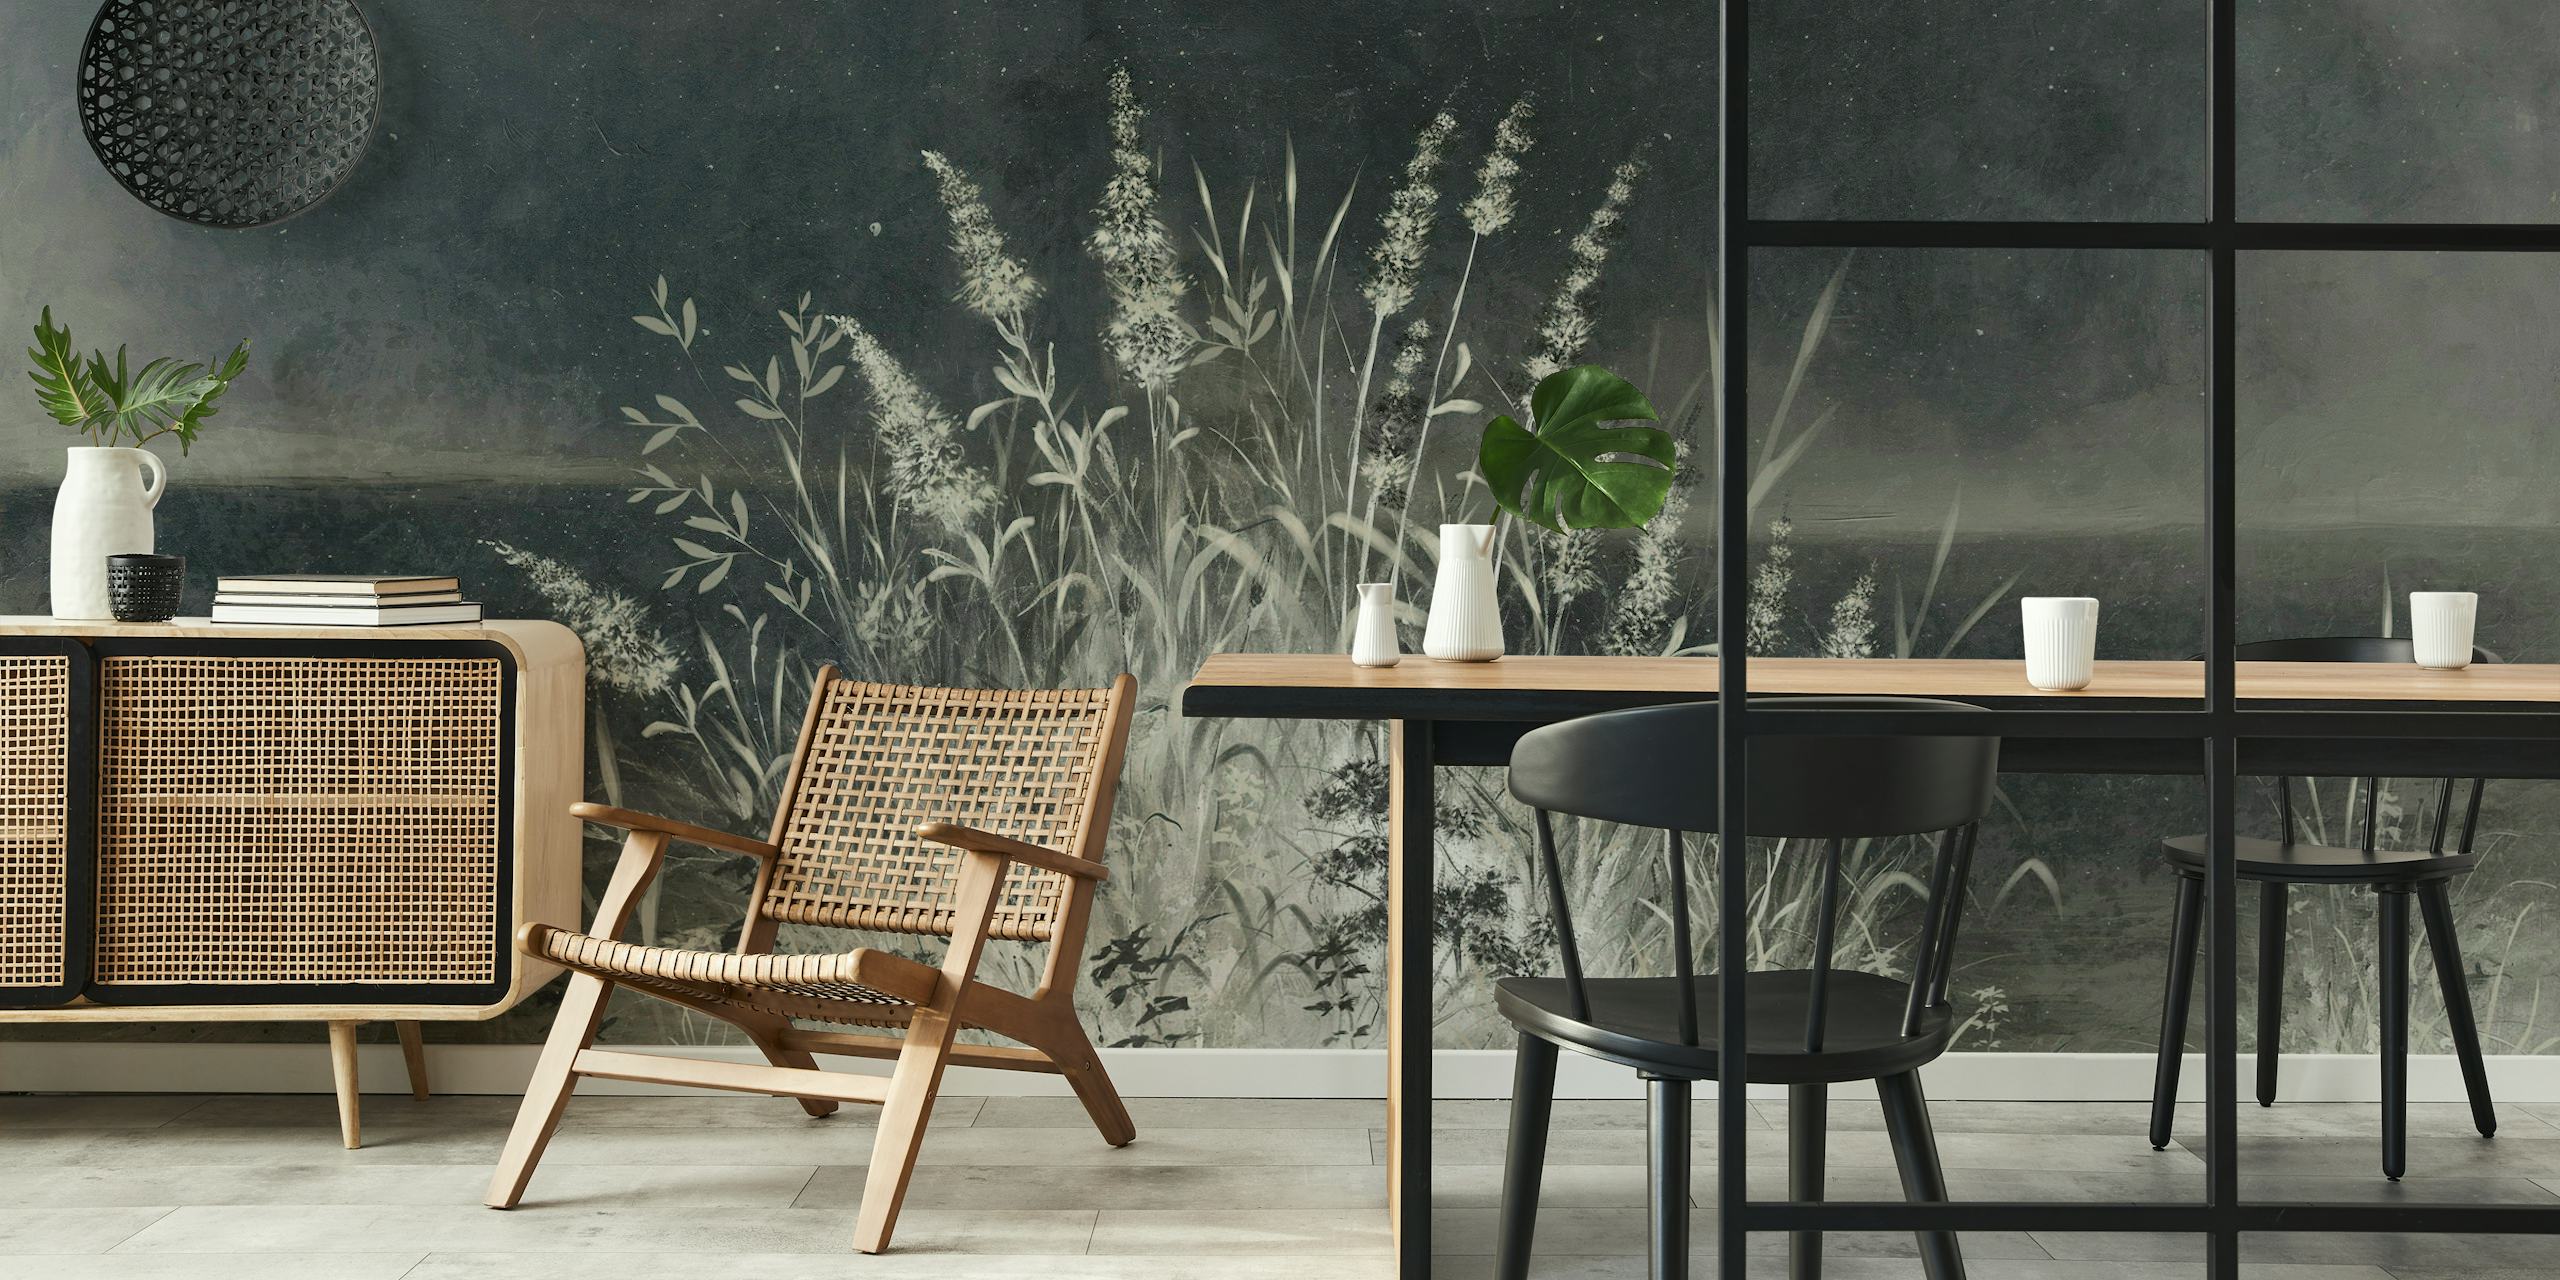 Monochrome wall mural of pampas grass at night, creating a tranquil ambiance for any interior.